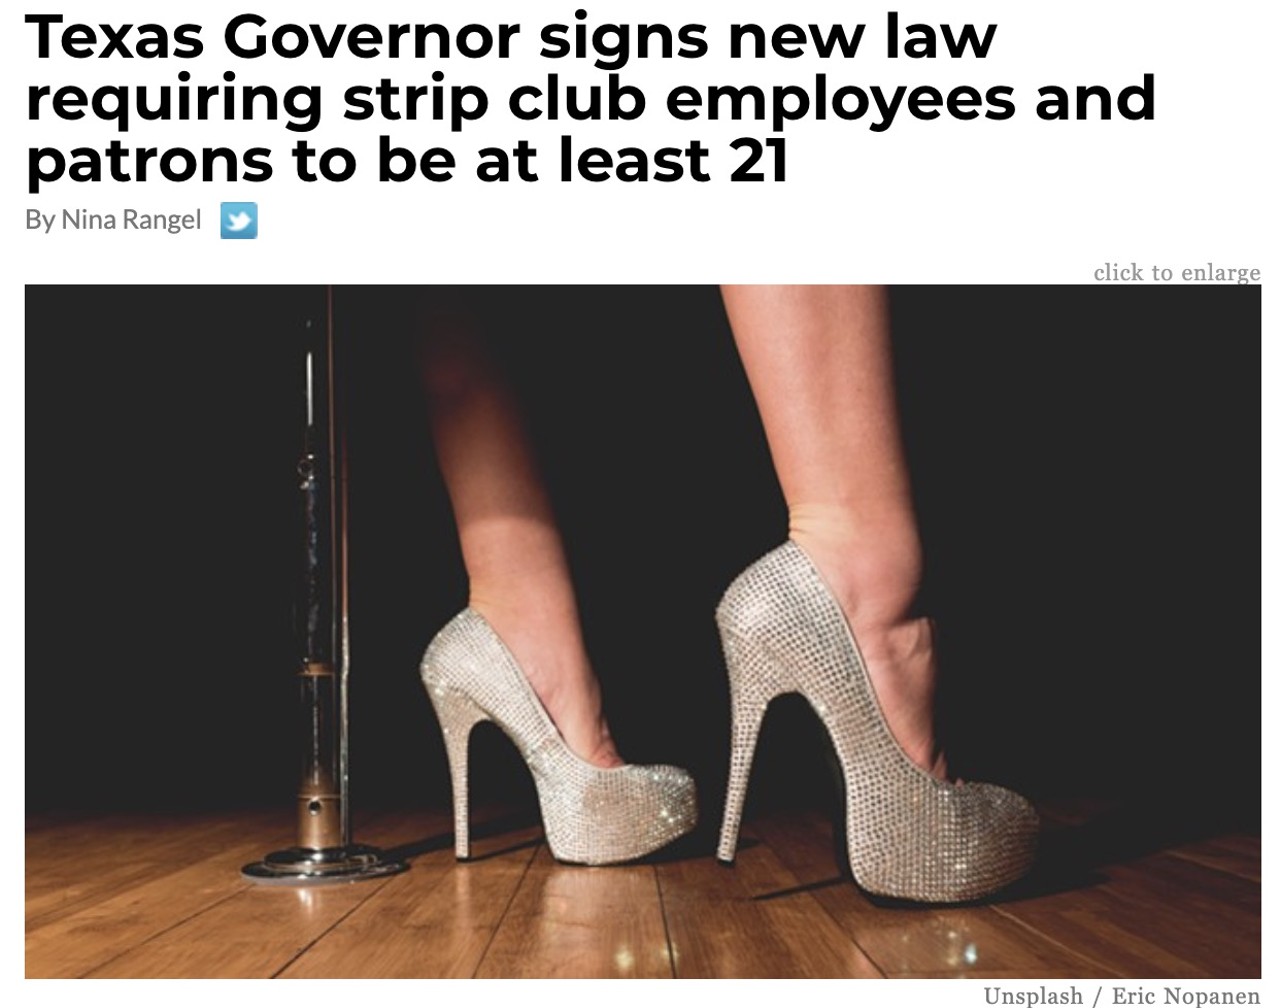 20. Texas Governor signs new law requiring strip club employees and patrons to be at least 21 